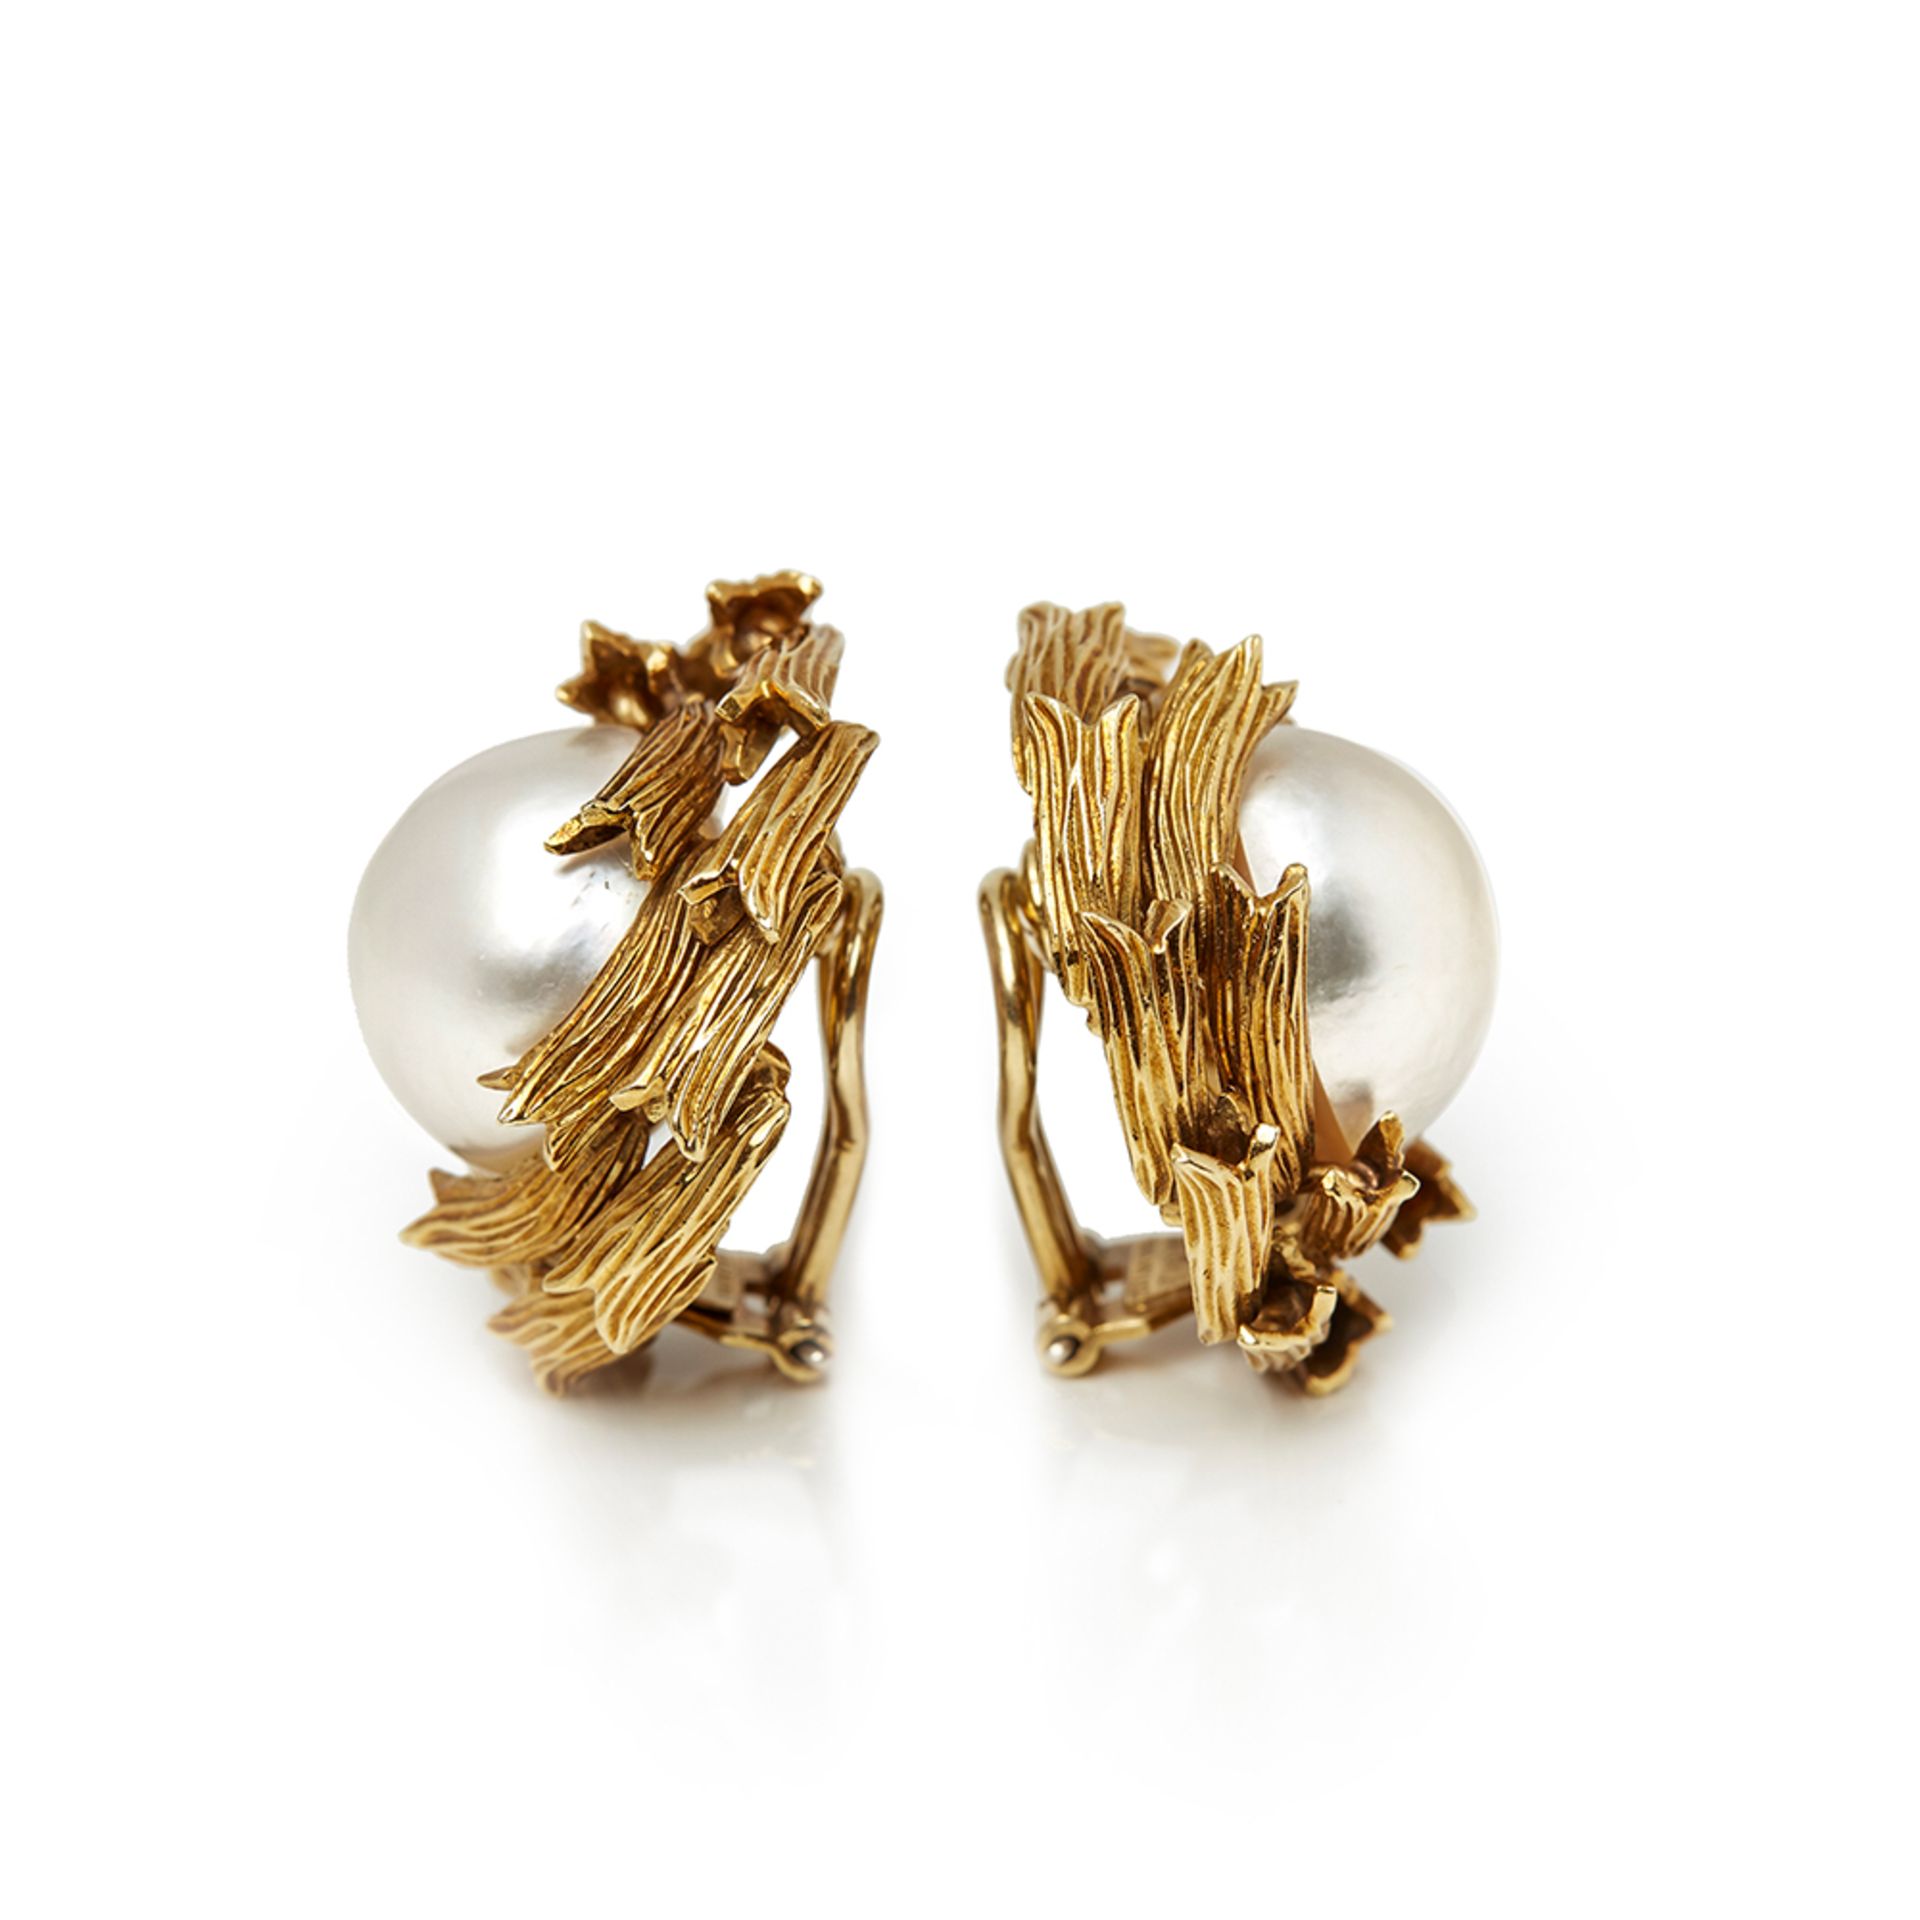 Tiffany & Co. 18k Yellow Gold Mabe Pearl Earrings - Image 3 of 8